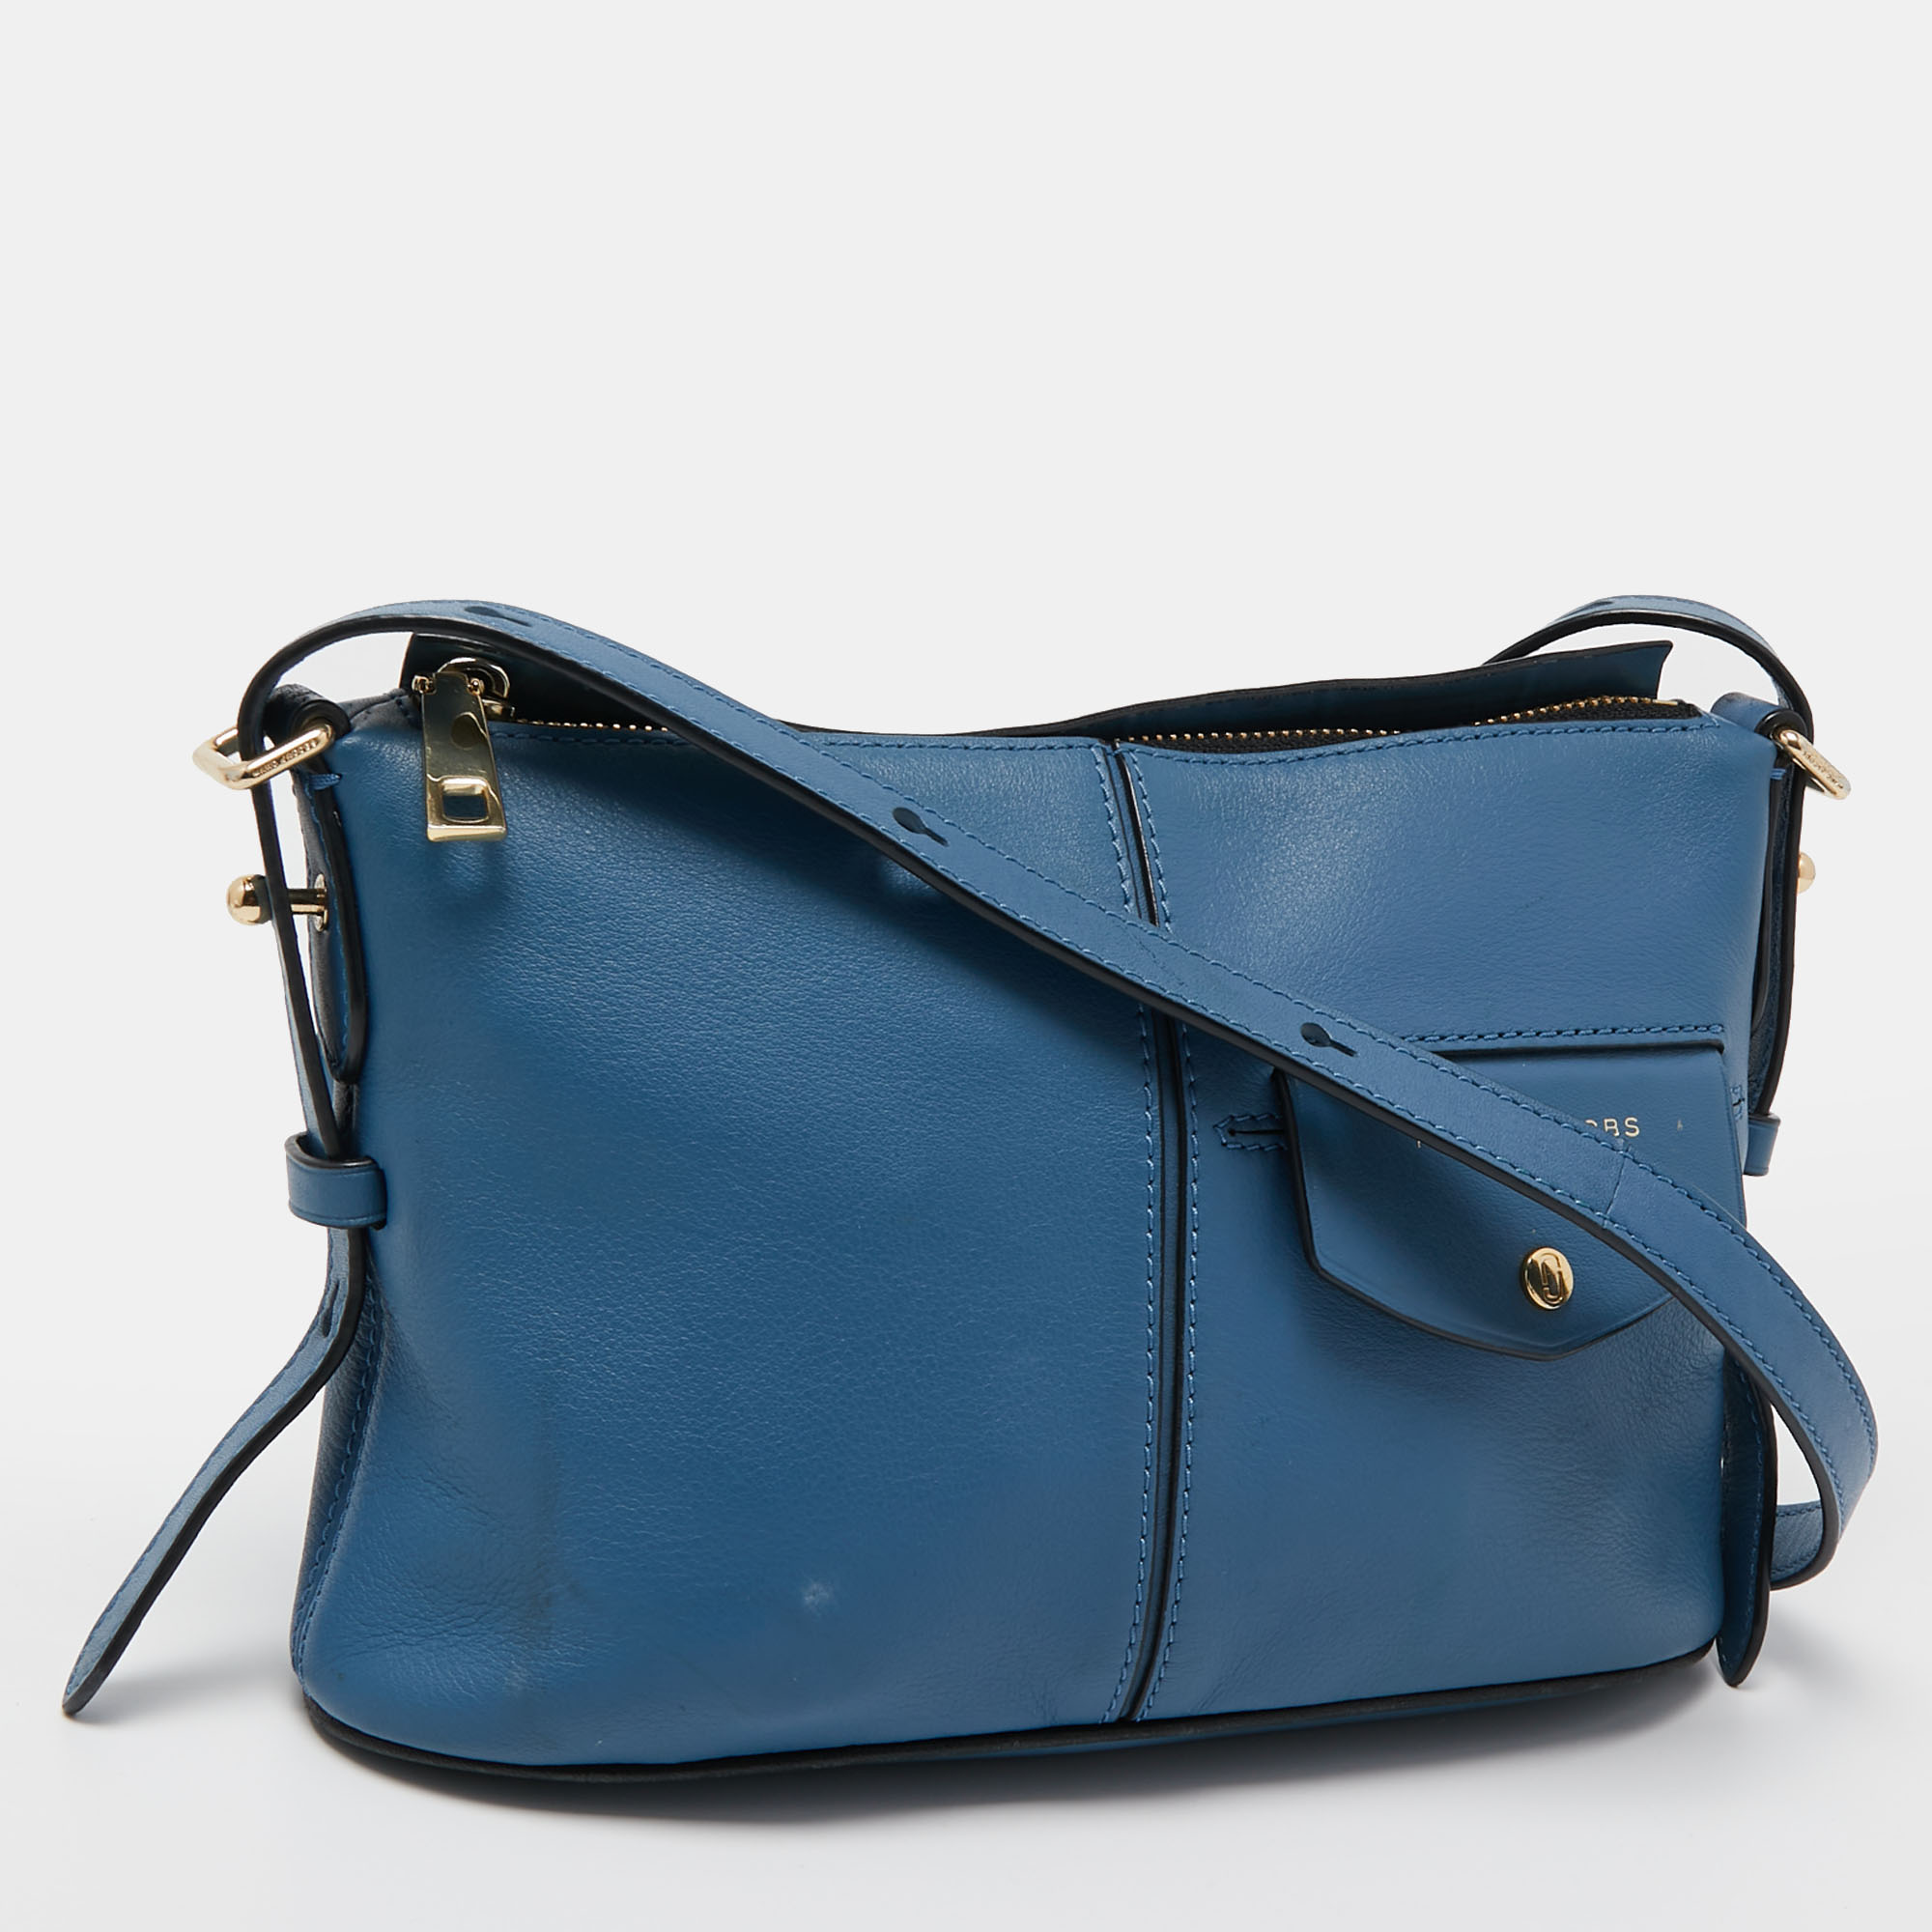 Marc Jacobs Blue Leather Small Crossbody Bag